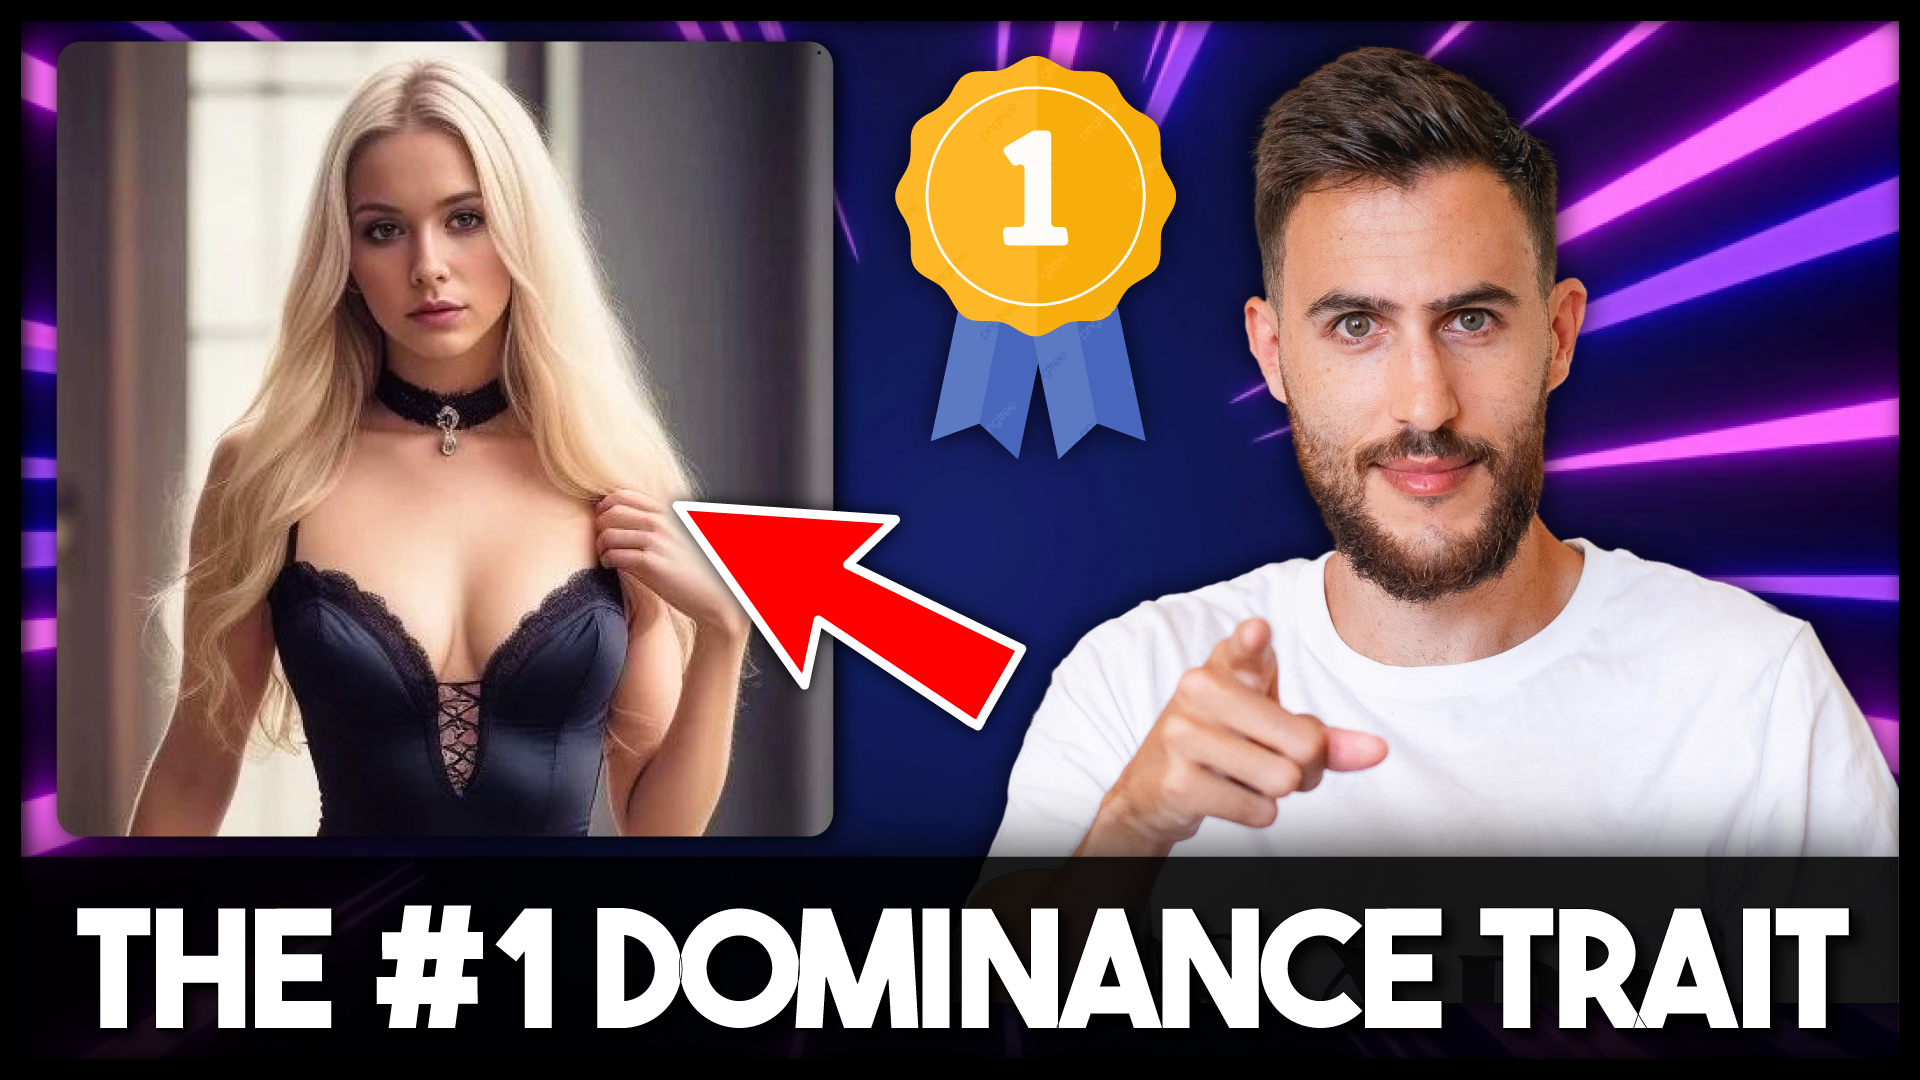 The #1 Dominance Trait That Hot Girls SECRETLY Want You To Have